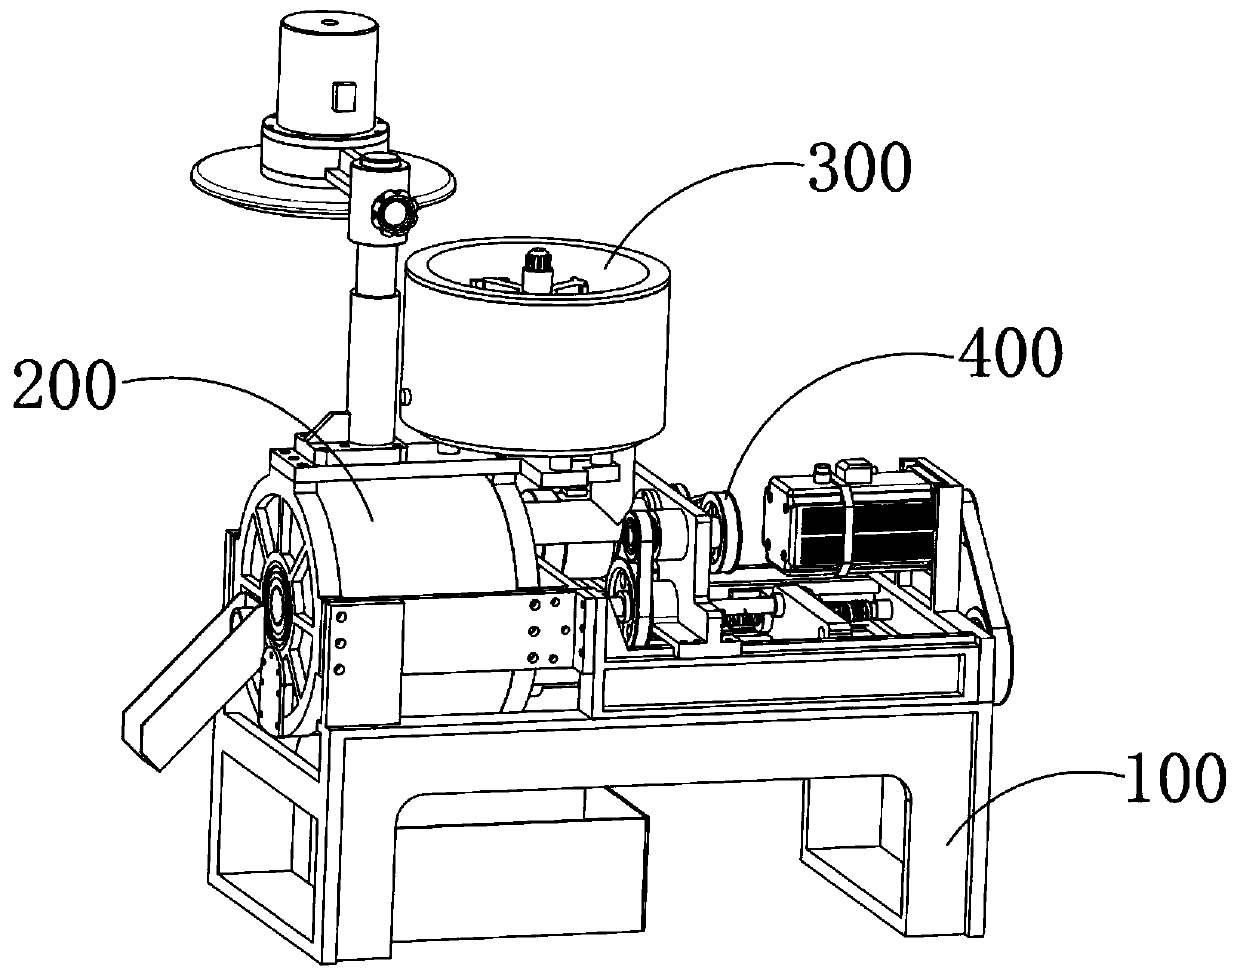 Efficient oil press for extracting oil from peanuts or soybeans